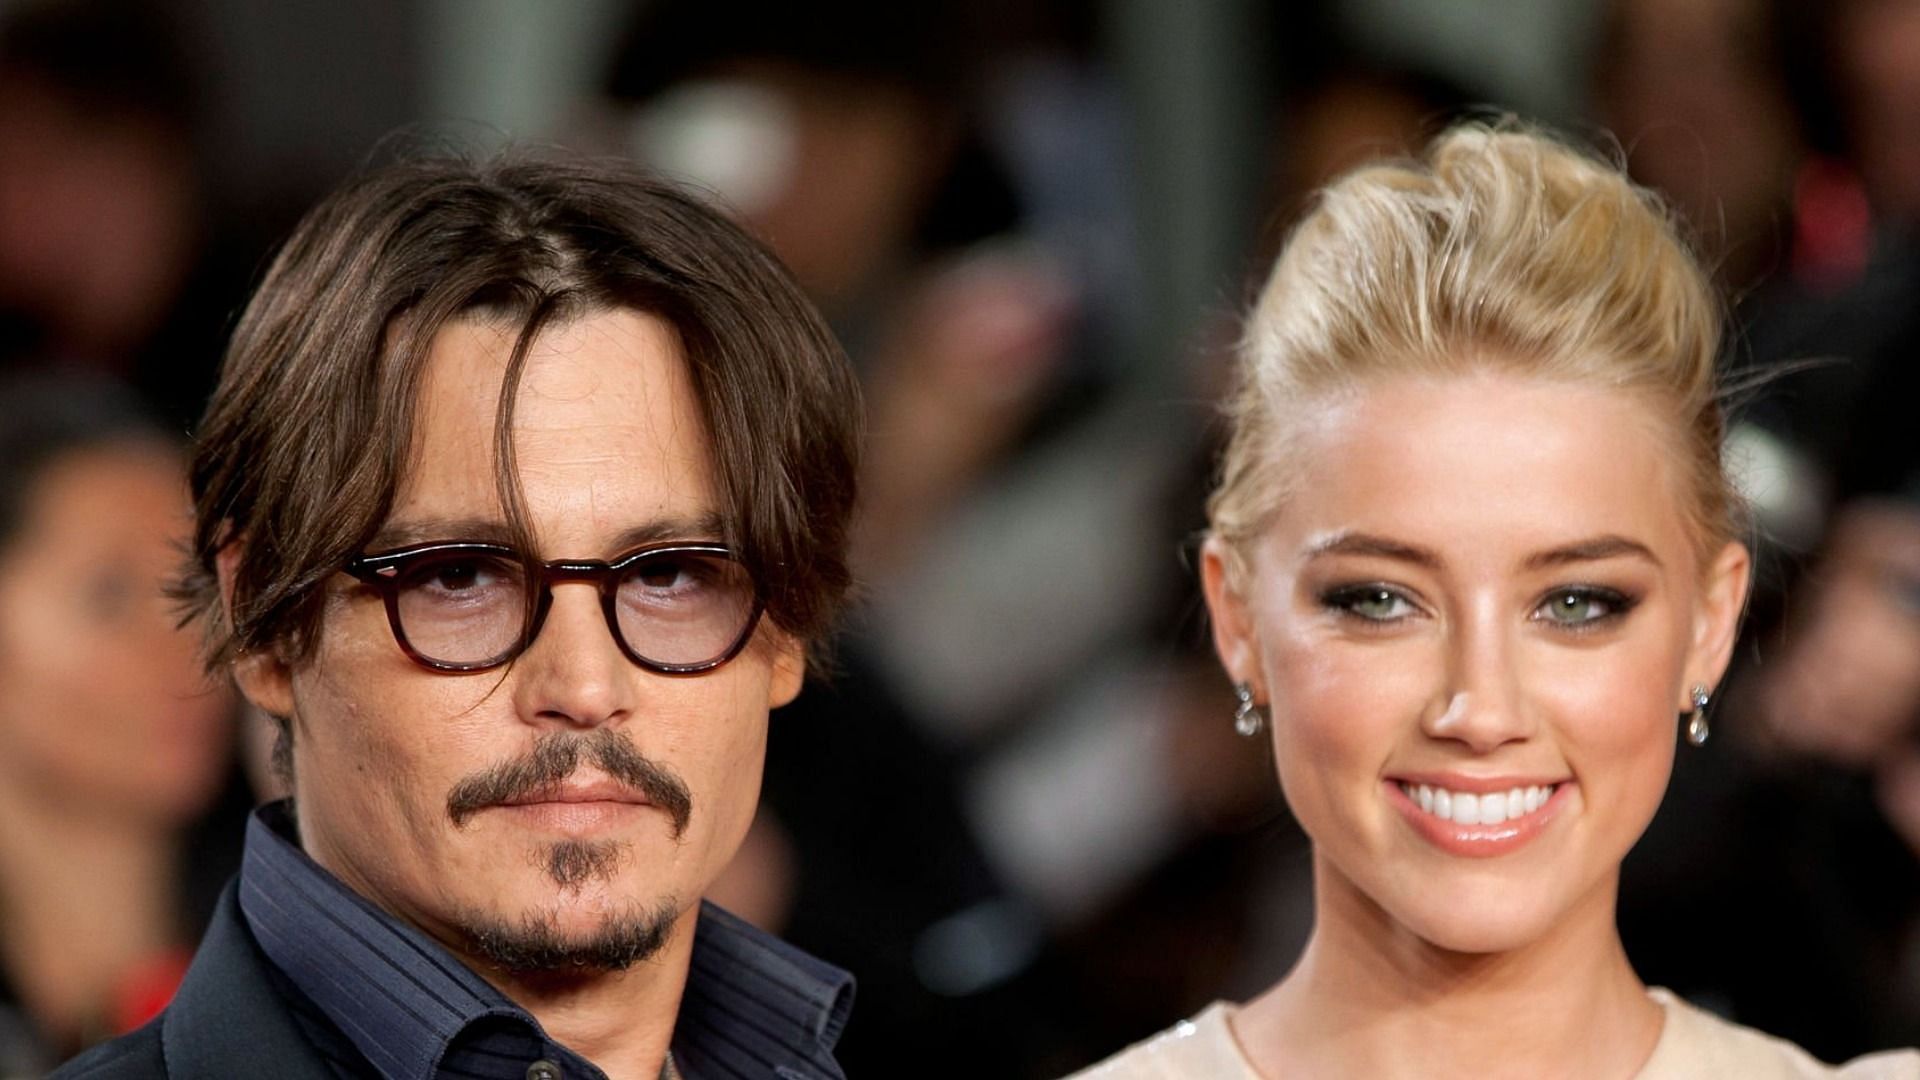 Johnny Depp opened up about Amber Heard&#039;s addiction issues on the second day of his testimony in the defamation trial (Image via Getty Images)